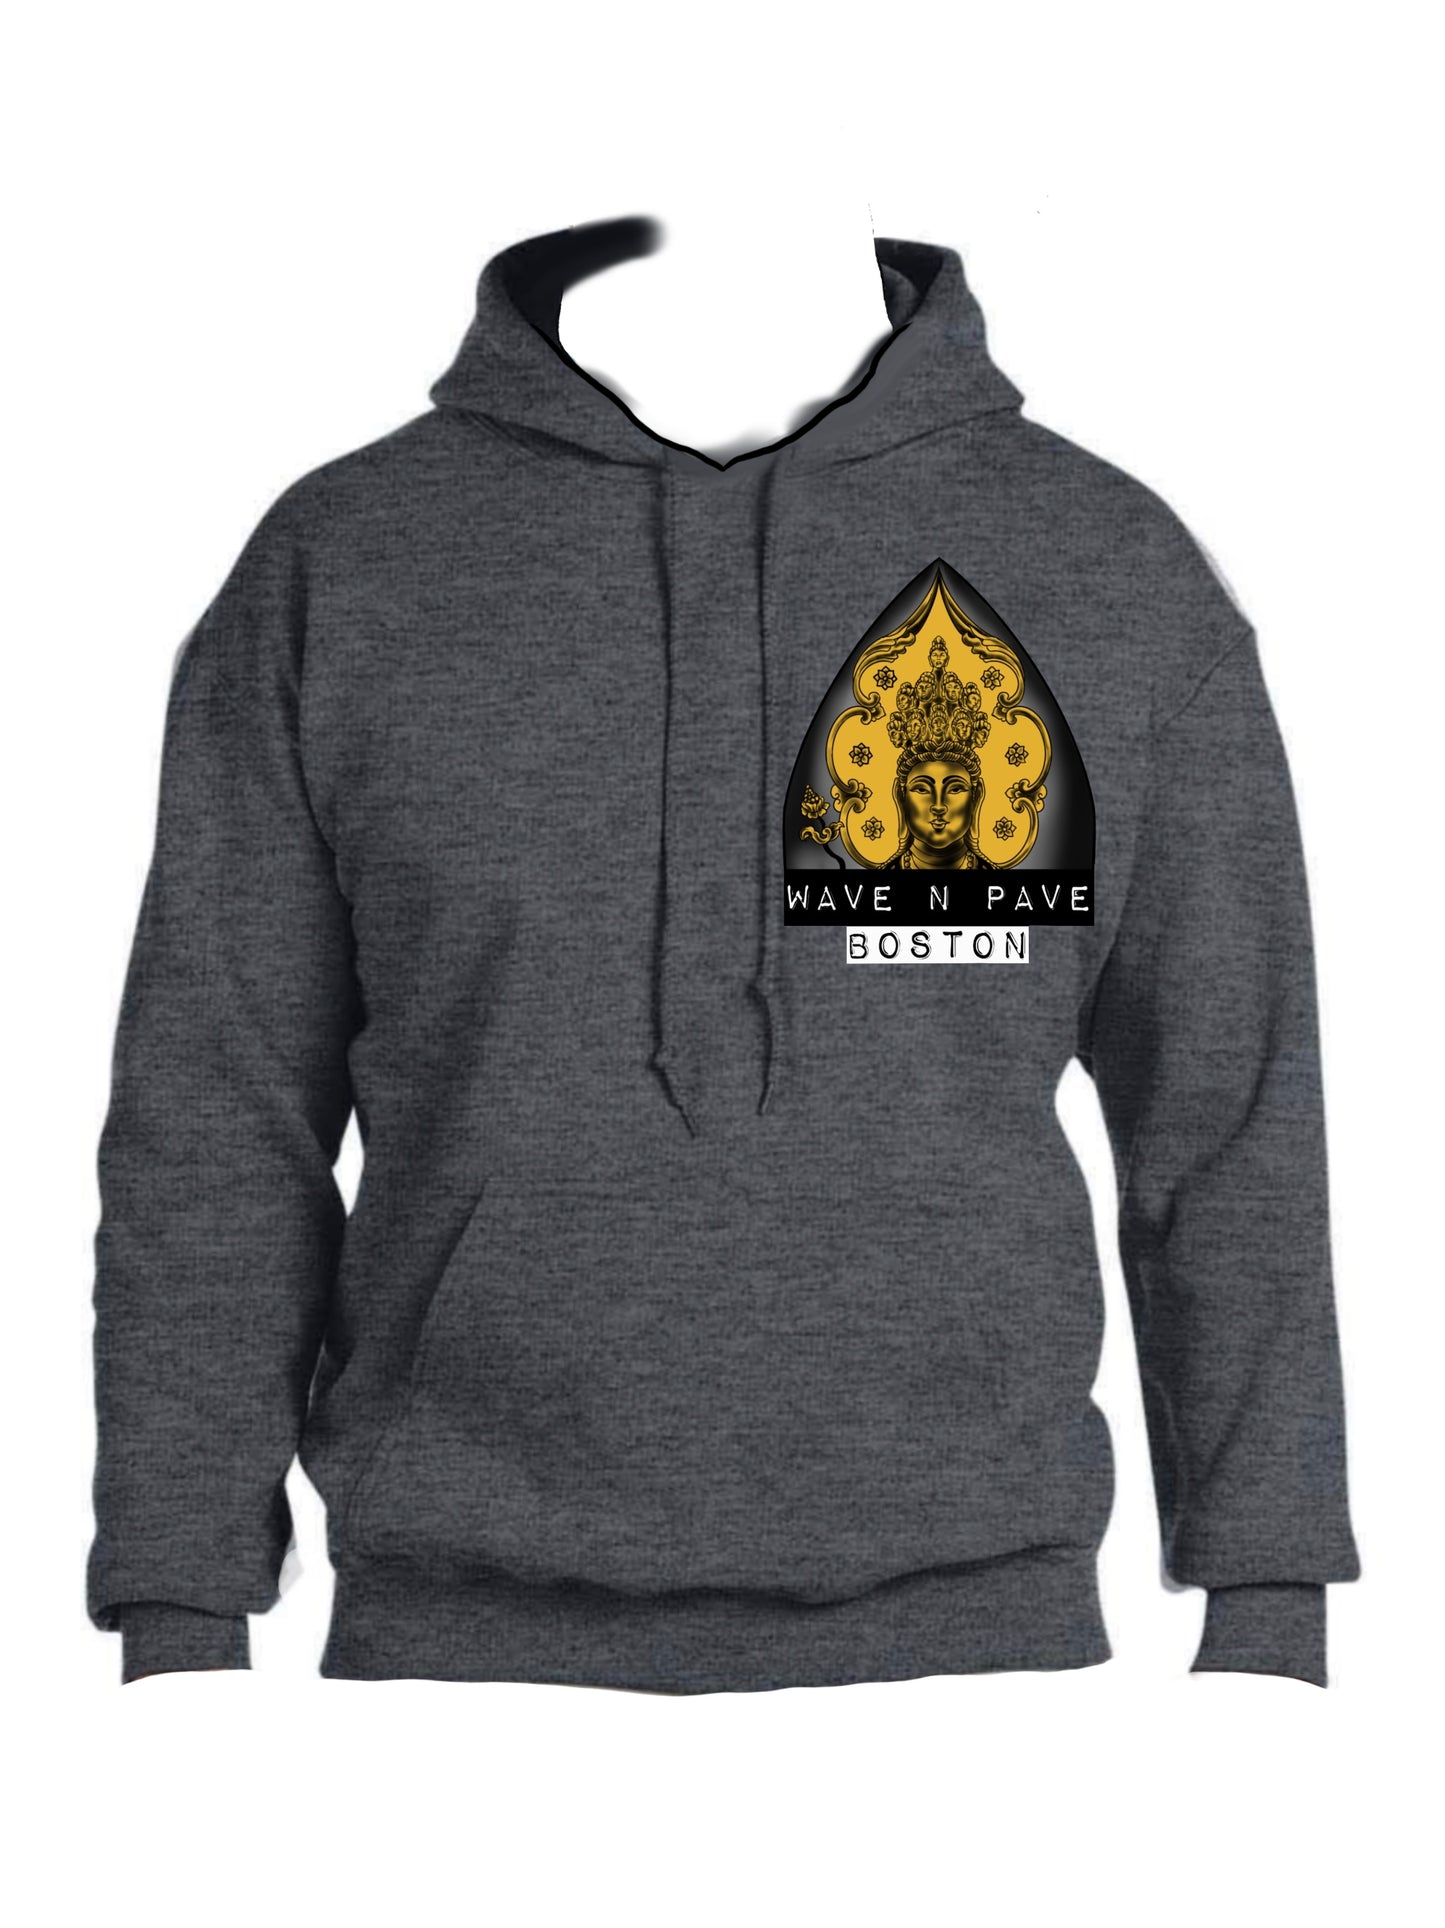 Spread Compassion Hoodie